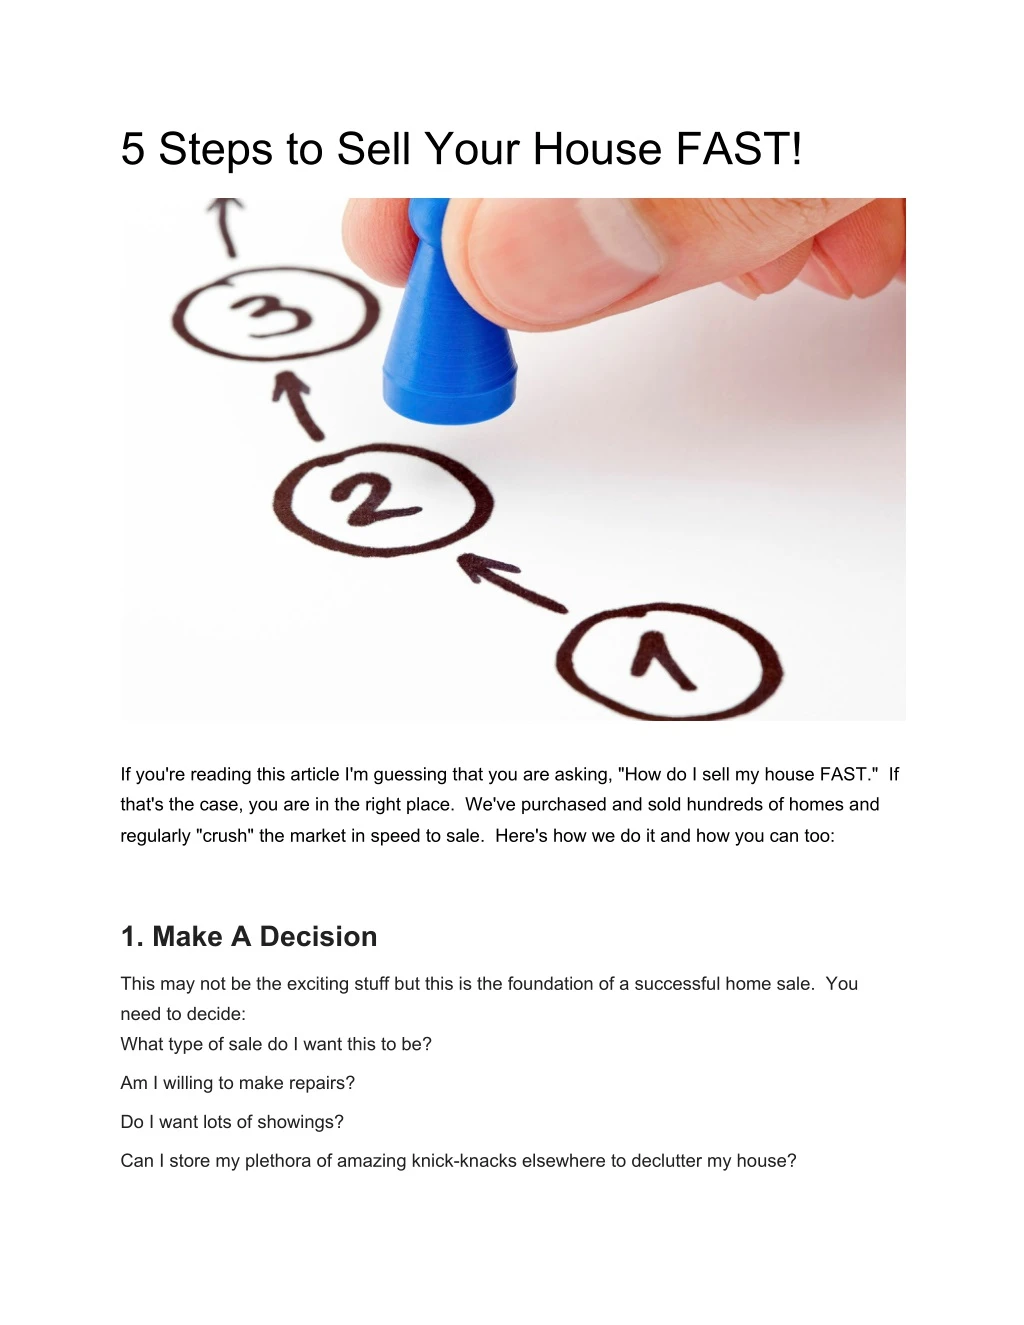 5 steps to sell your house fast